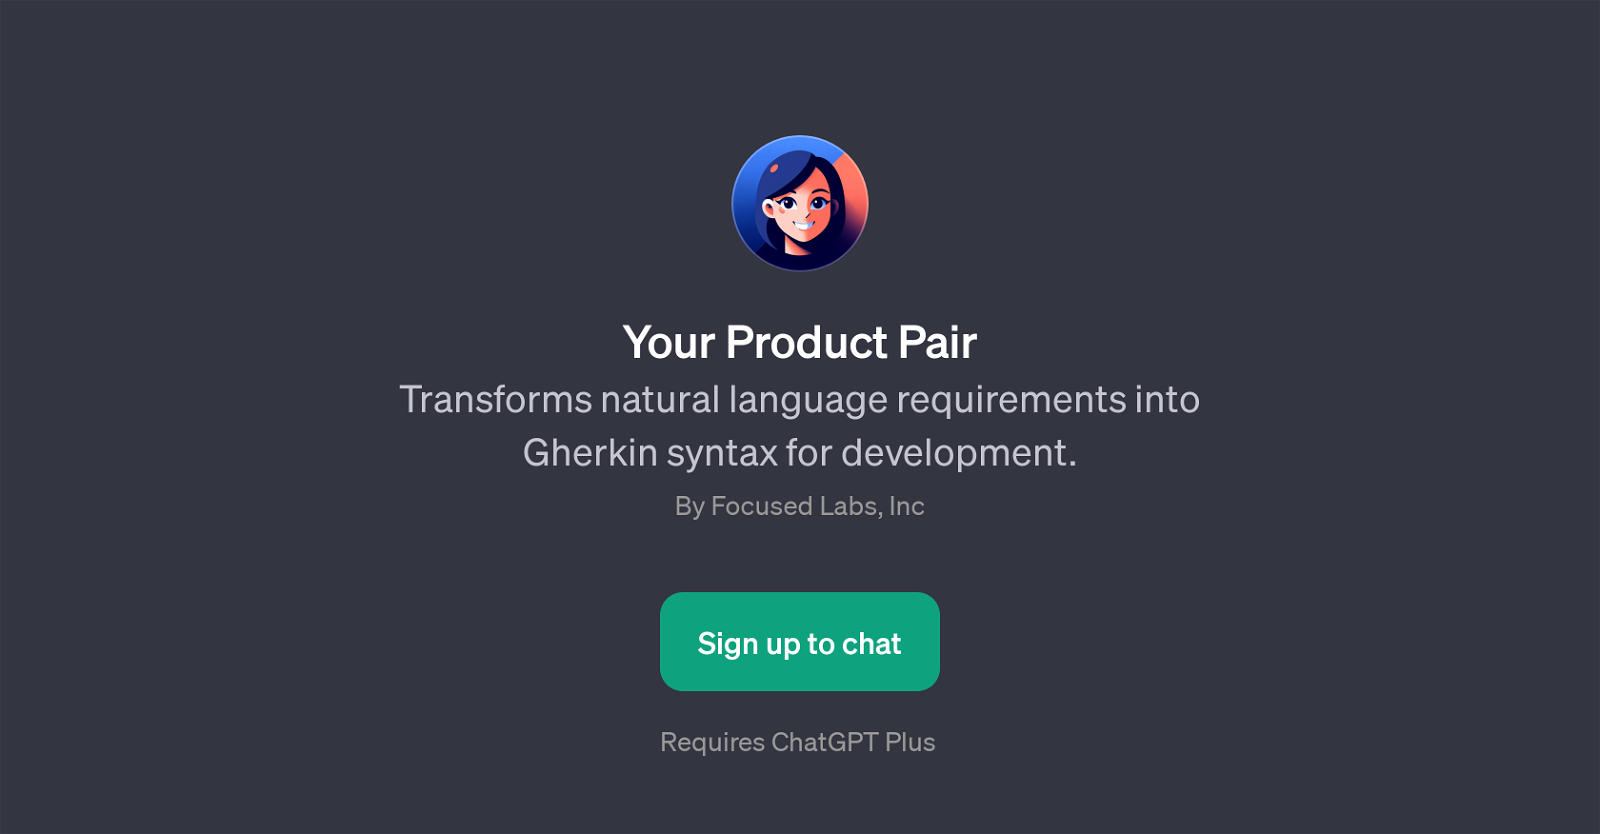 Your Product Pair website